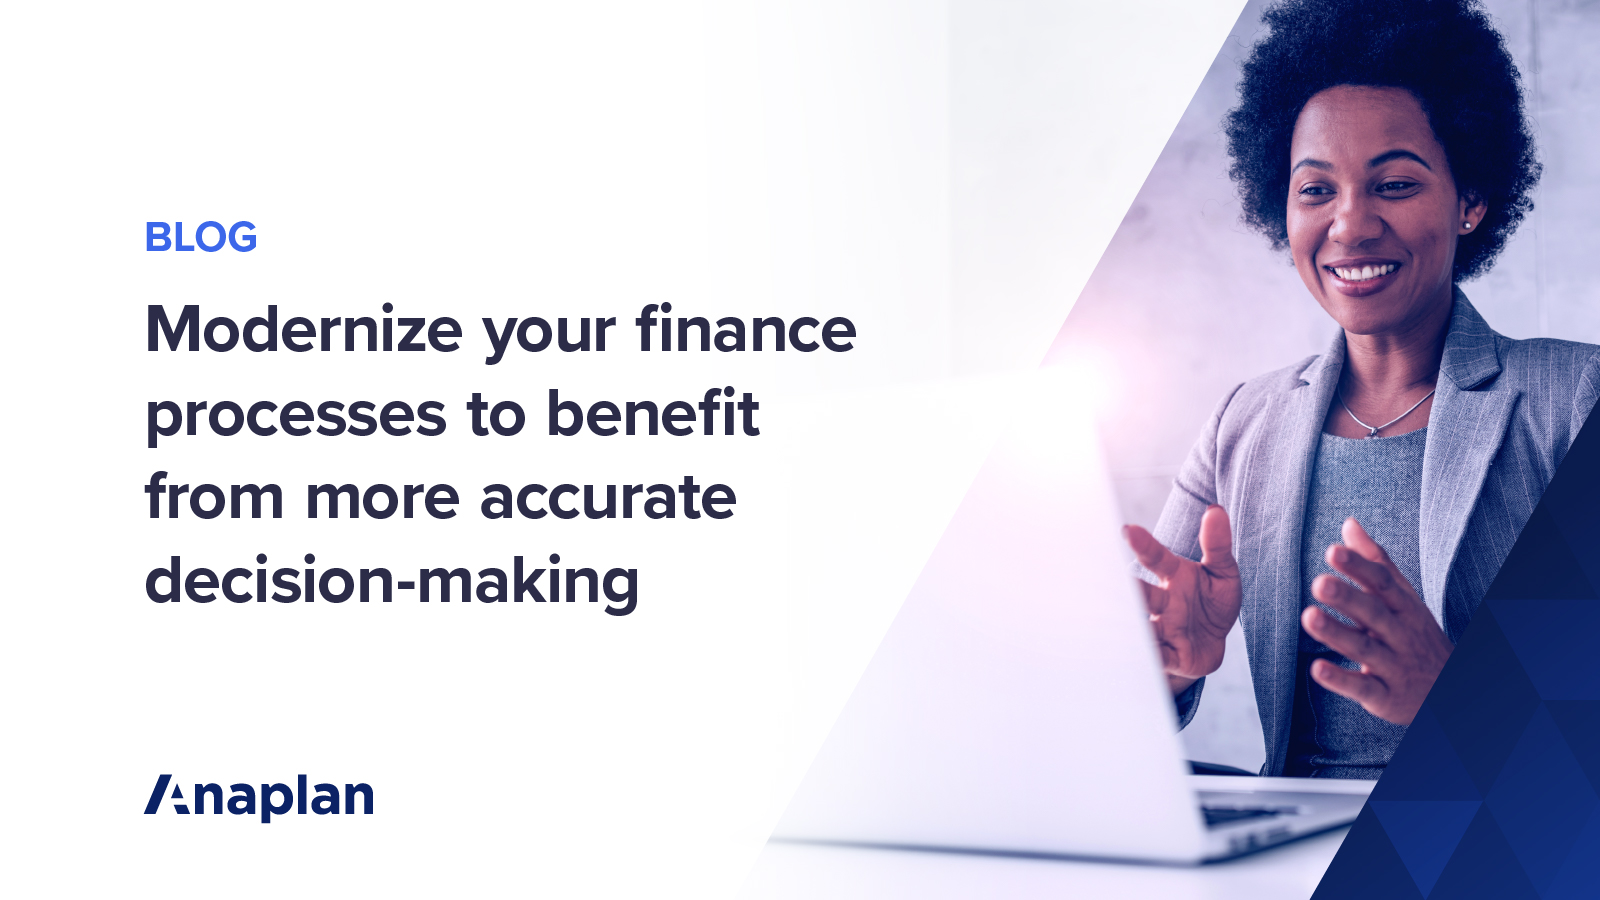 Modernize finance processes for more accurate decision-making | Anaplan